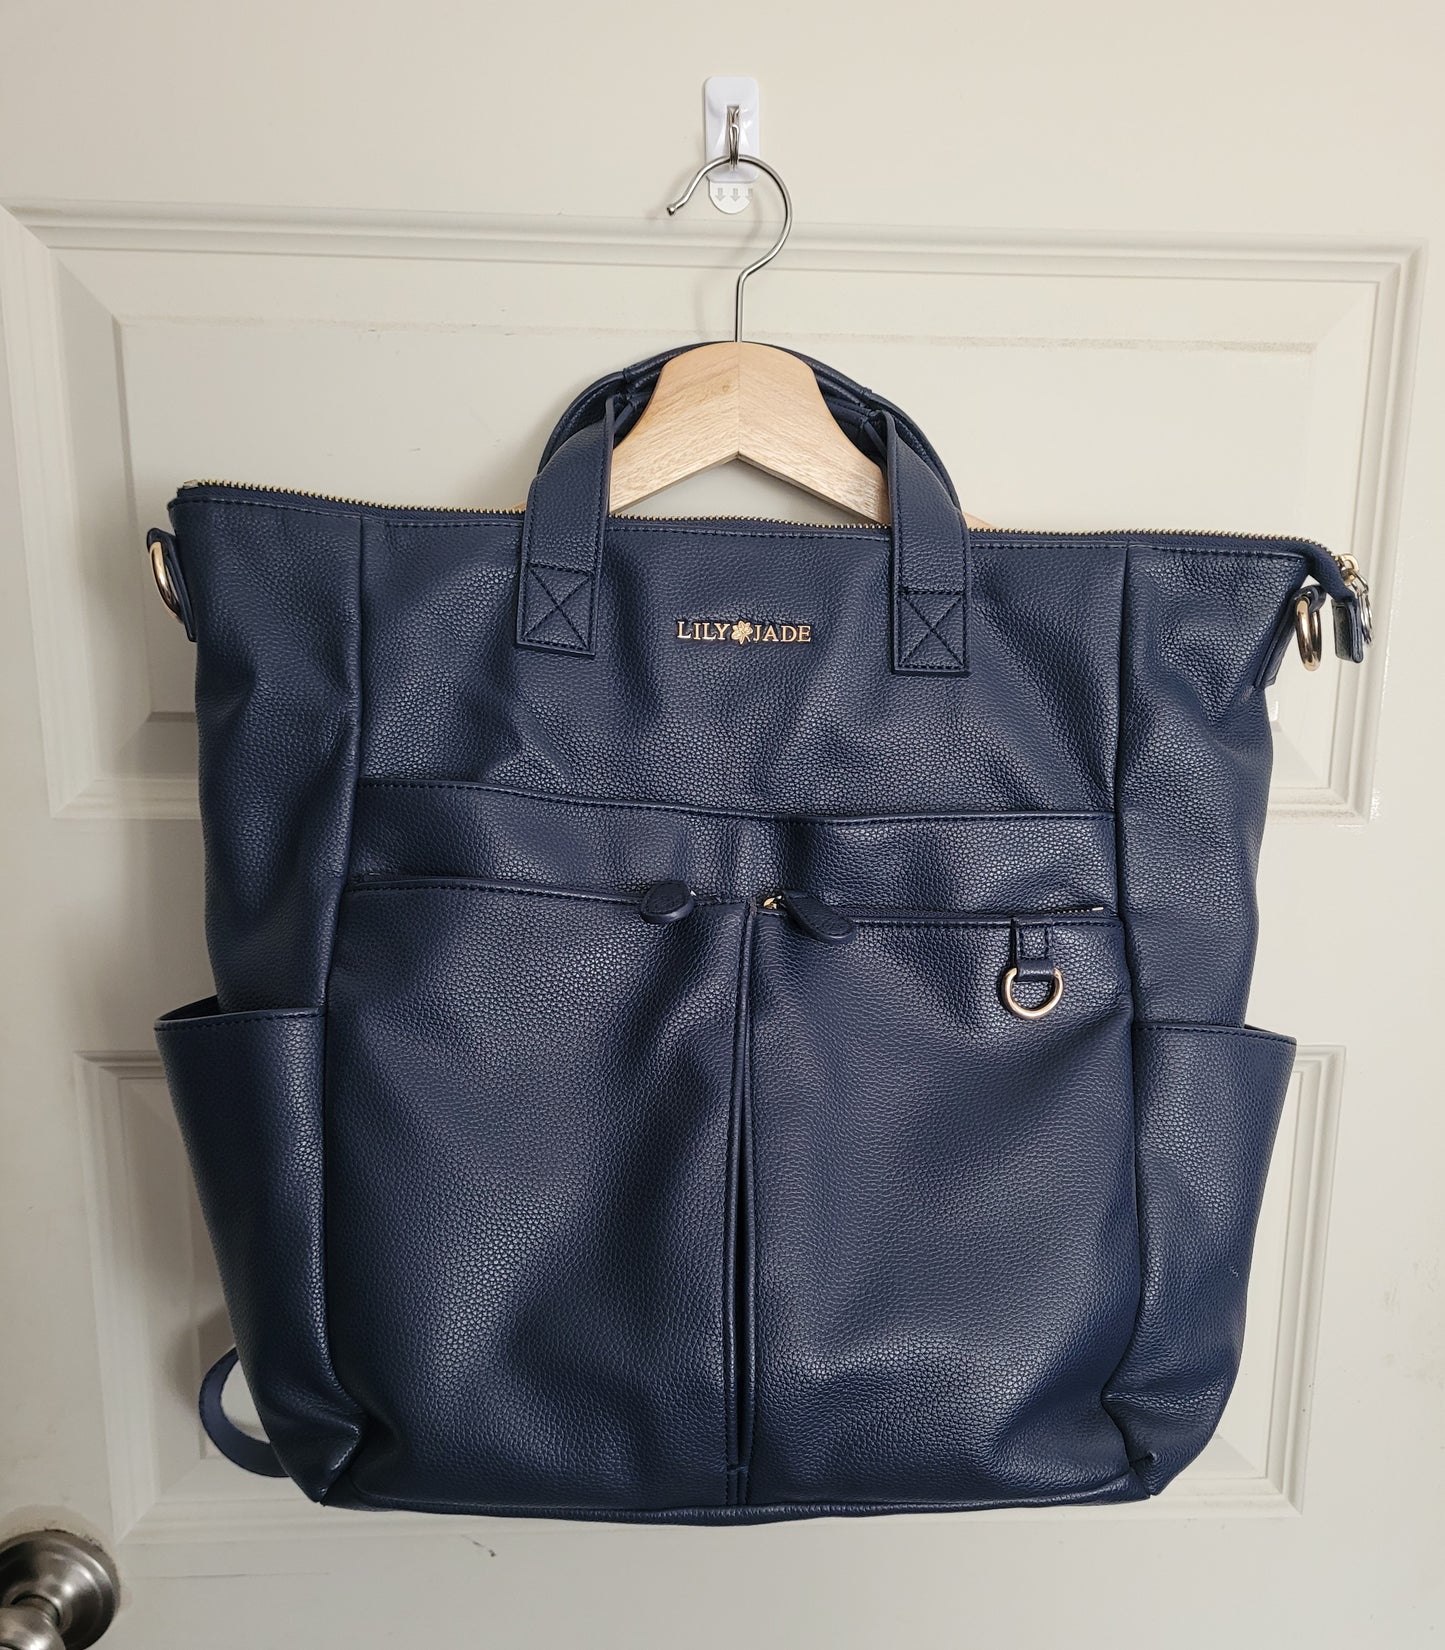 Lily Jade Navy Blue Leather Diaper Bag